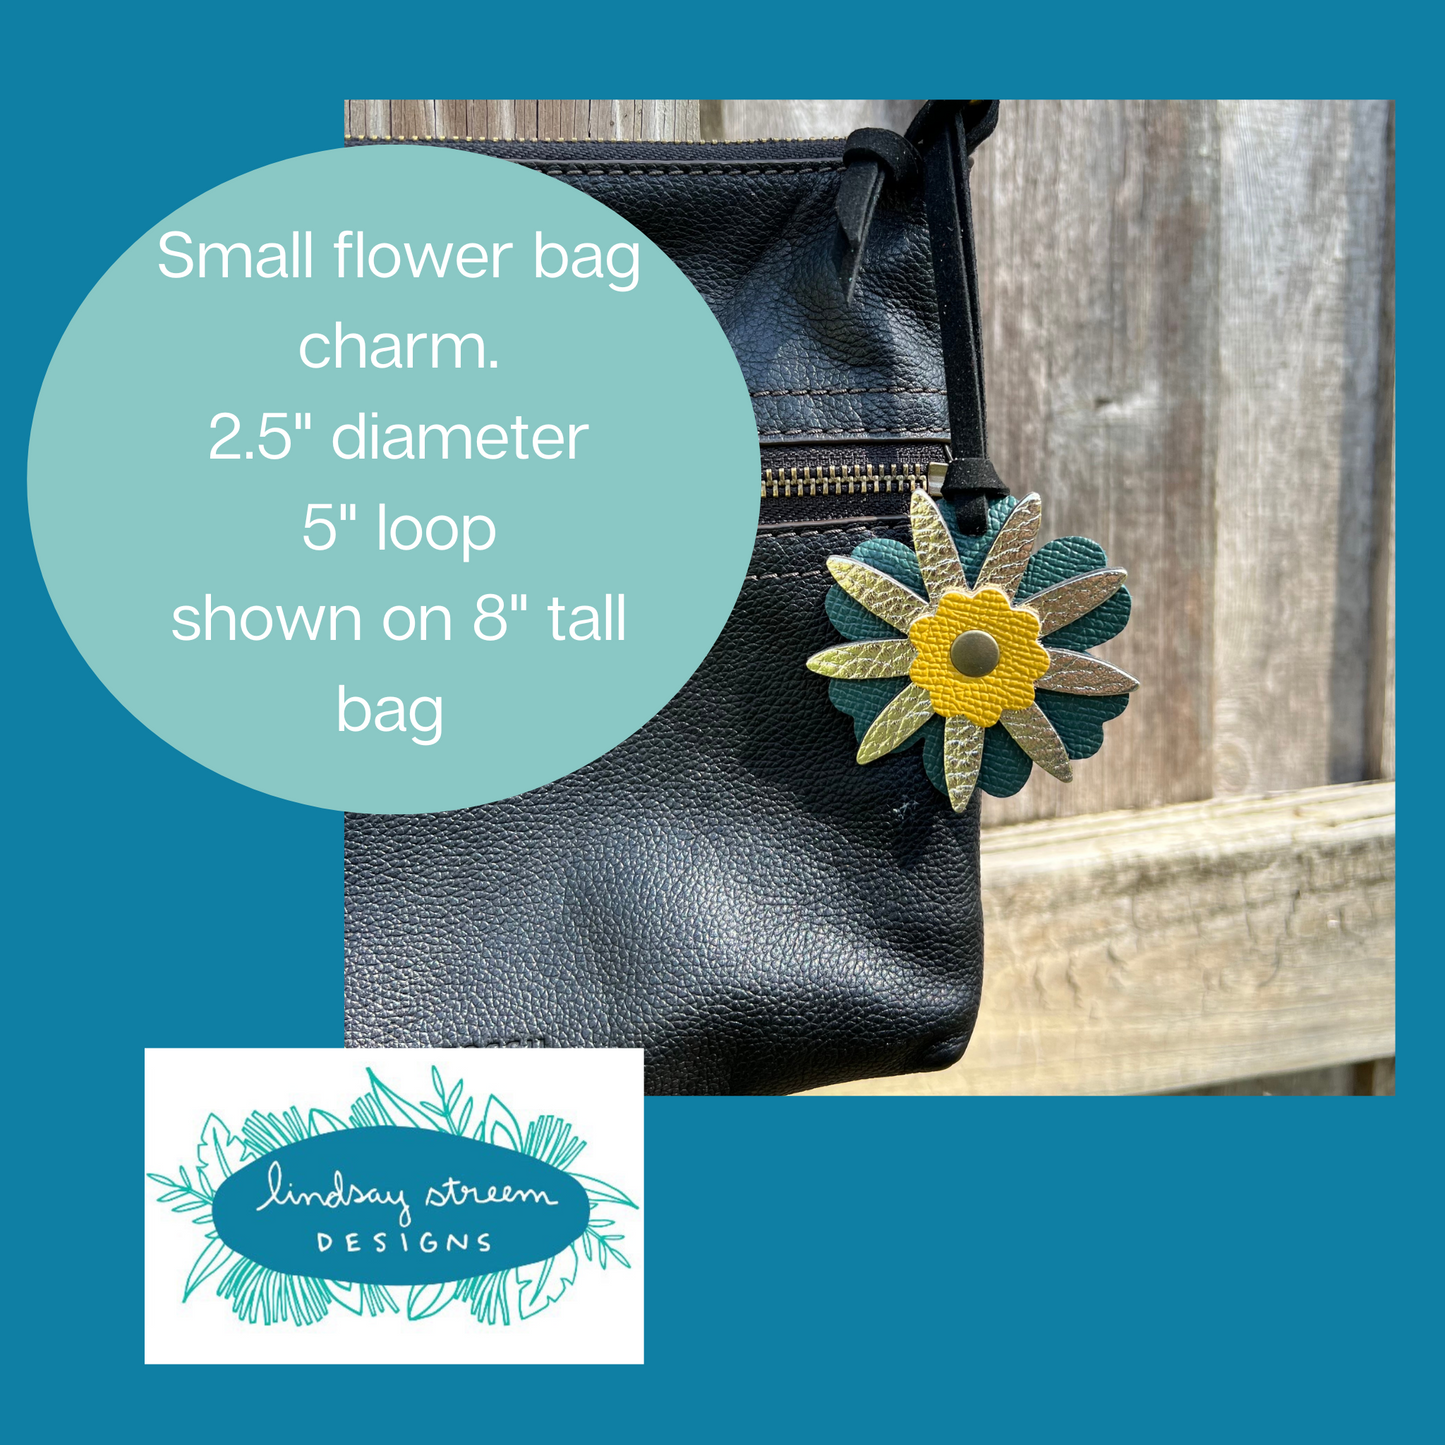 Small Leather Flower Purse Charm - Light Blue, Pink and White